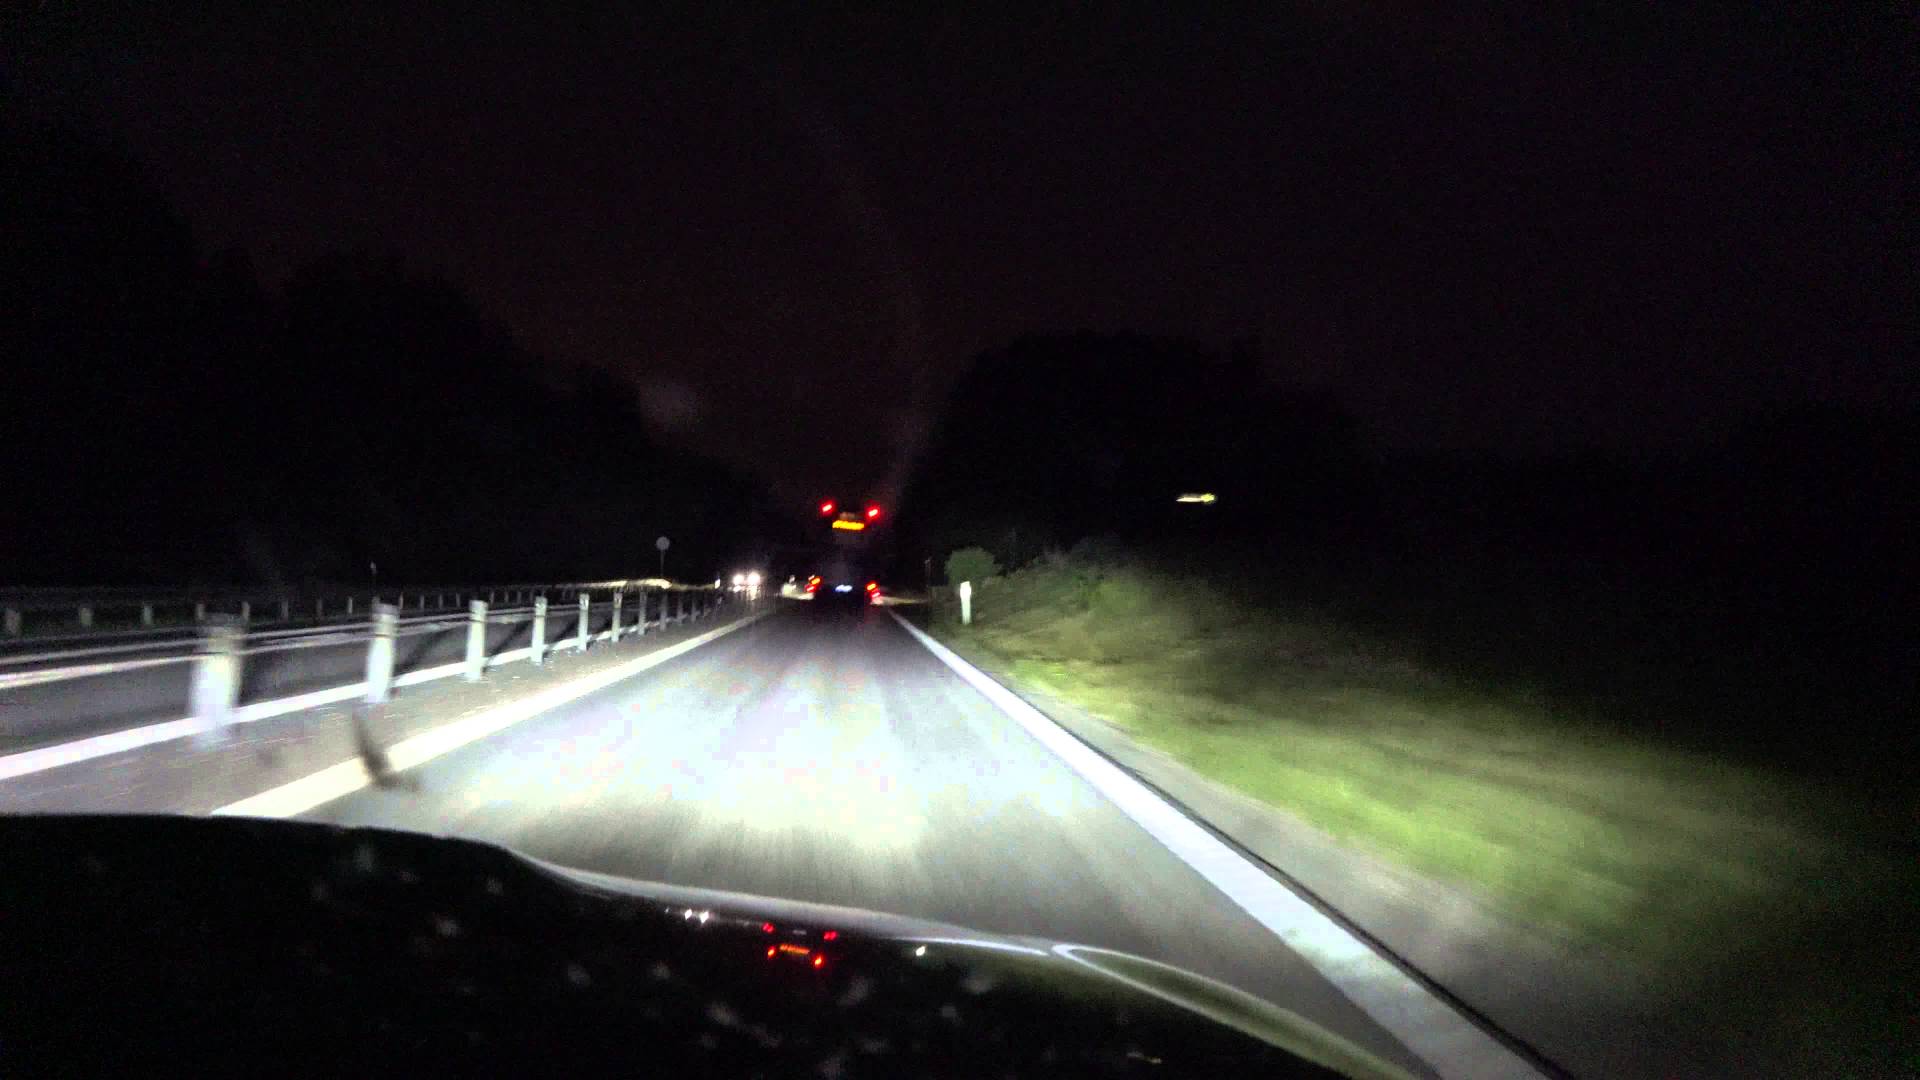 4k] BMW M3 Adaptive Full LED Lights and Automatic high beams in use ...